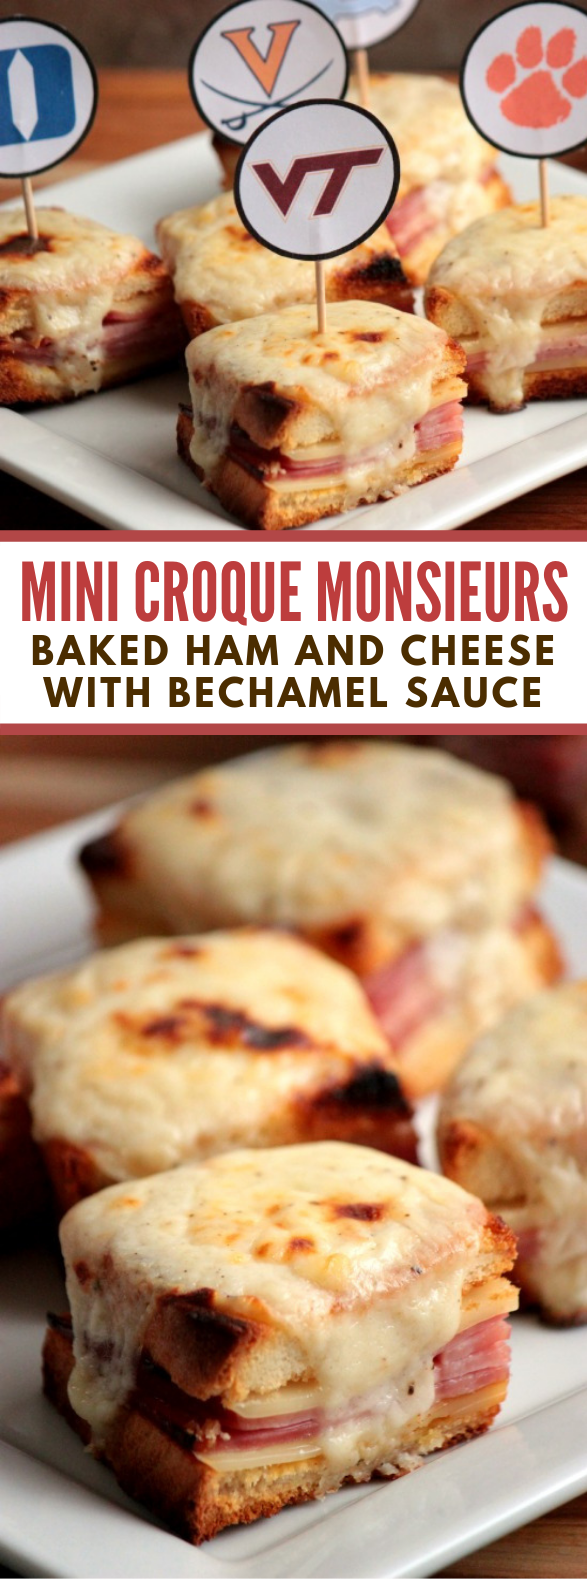 MINI CROQUE MONSIEURS { BAKED HAM AND CHEESE WITH BECHAMEL SAUCE}  #lunch #sandwiches